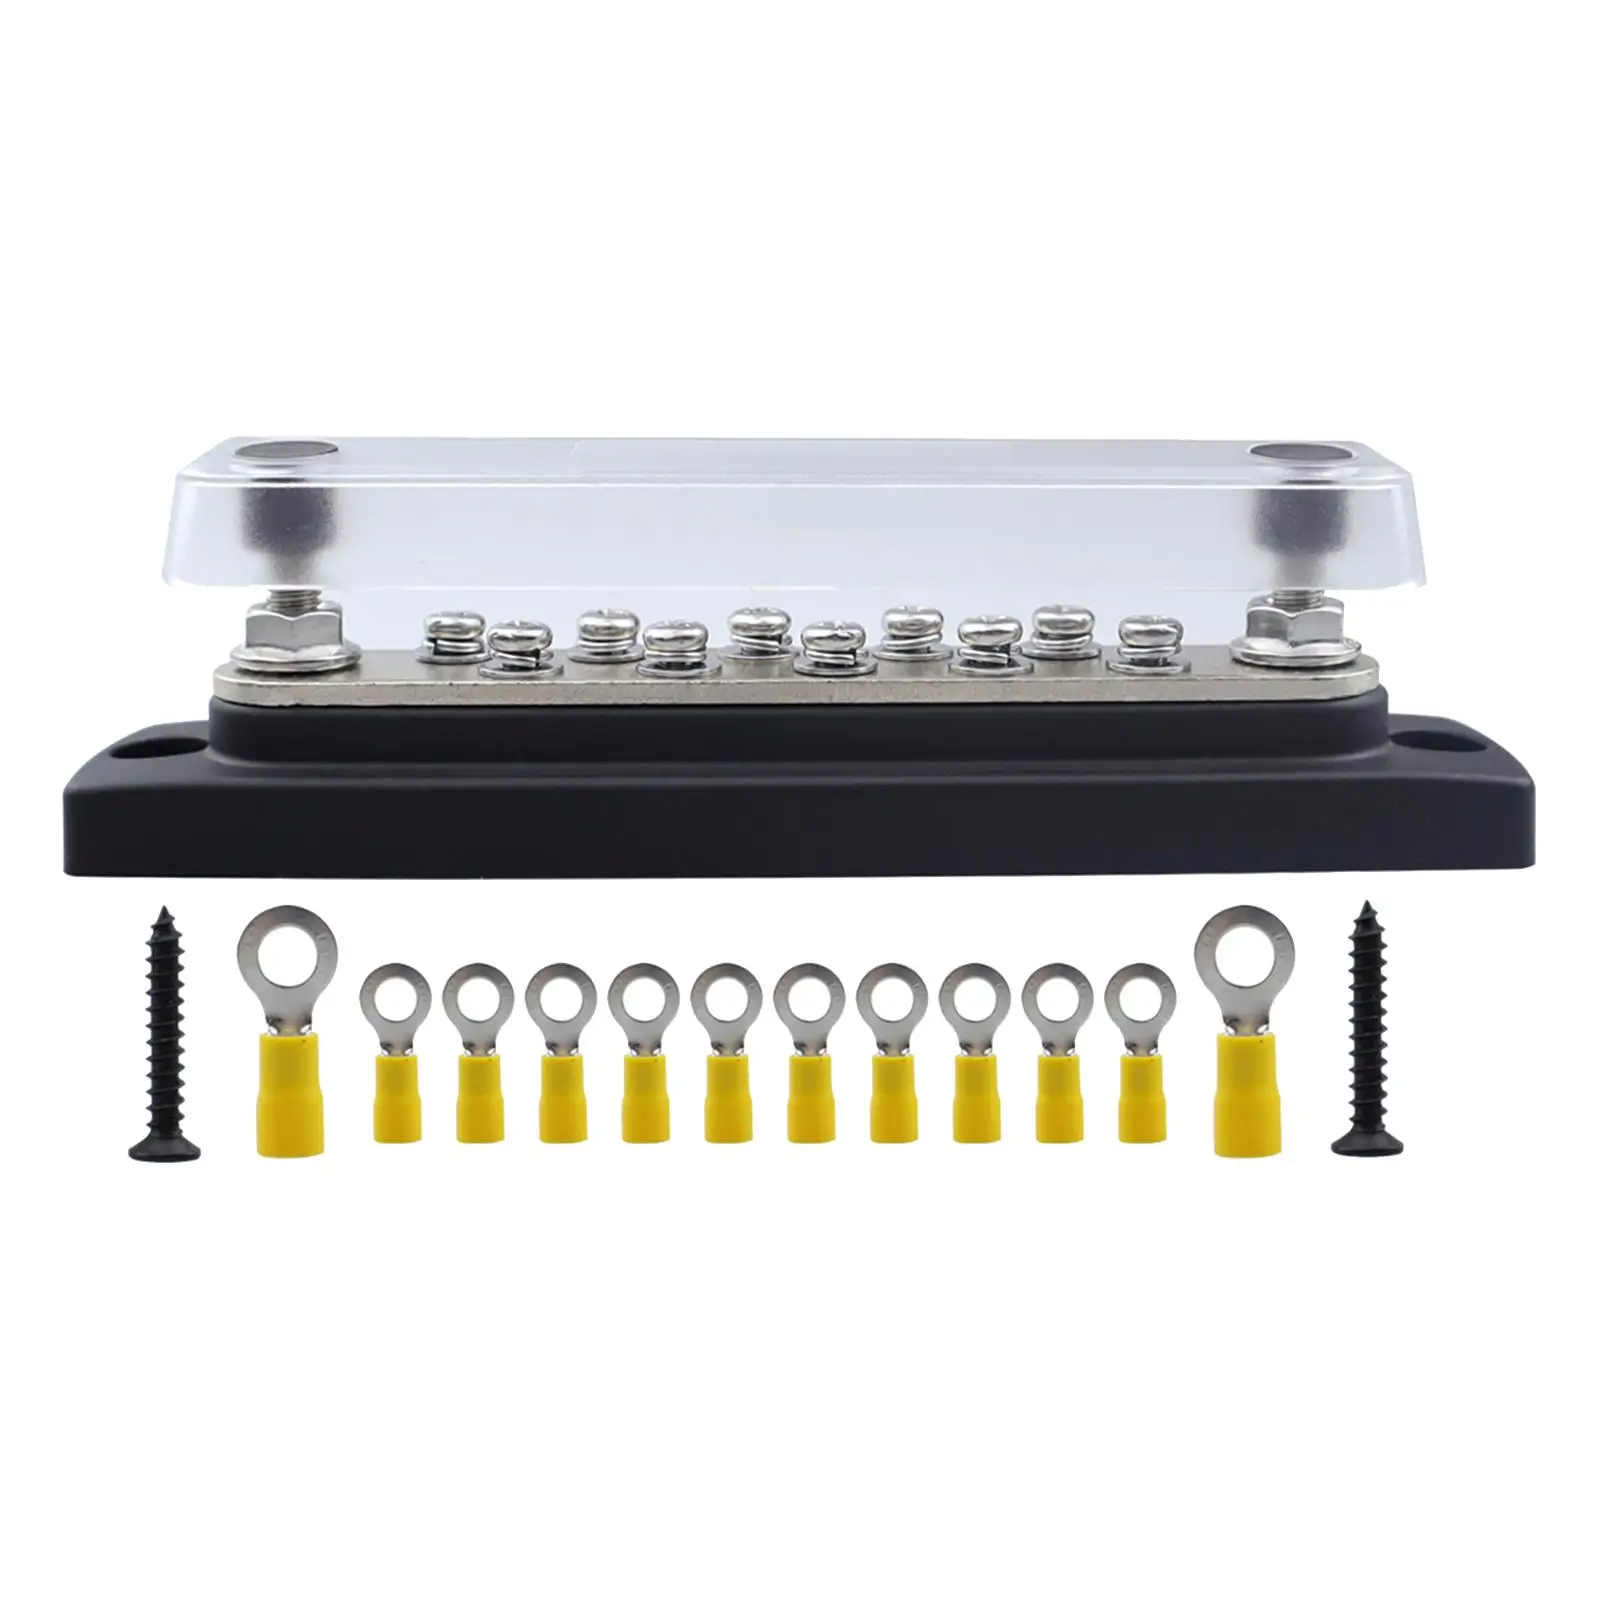 Power Distribution Block Bus Bar Durable Replacement Parts with Transparent Cover Fireproof DC 12-48V 150A for Marine Car